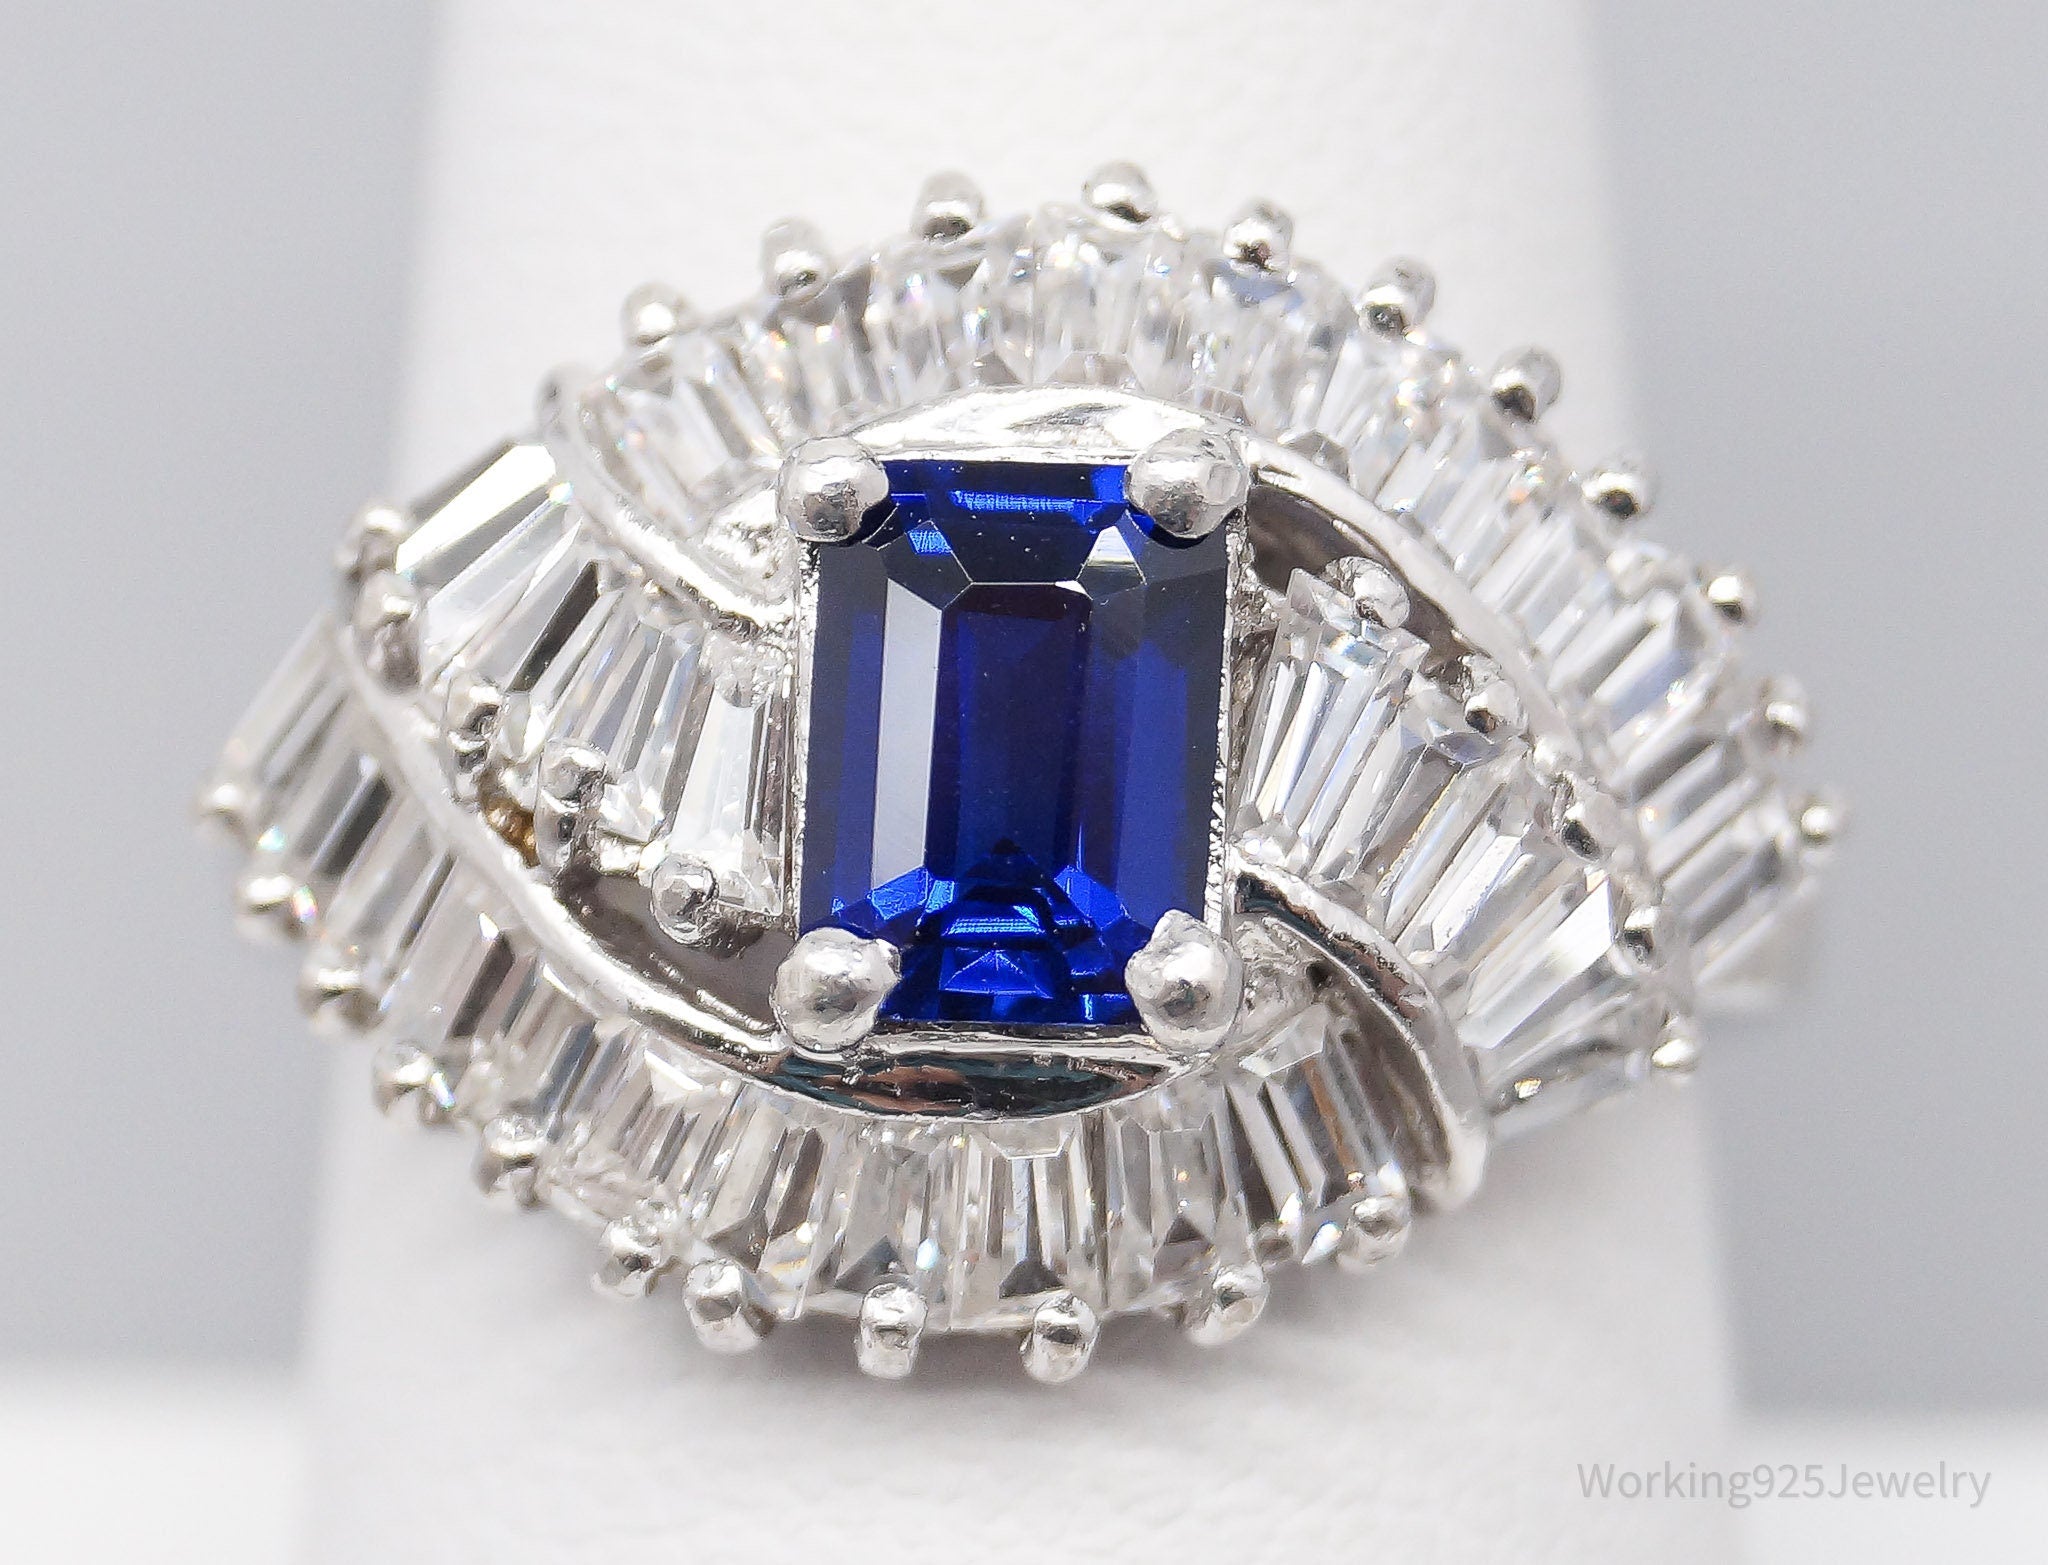 Vintage Lab Sapphire Cubic Zirconia Sterling Silver Ring - Size 8